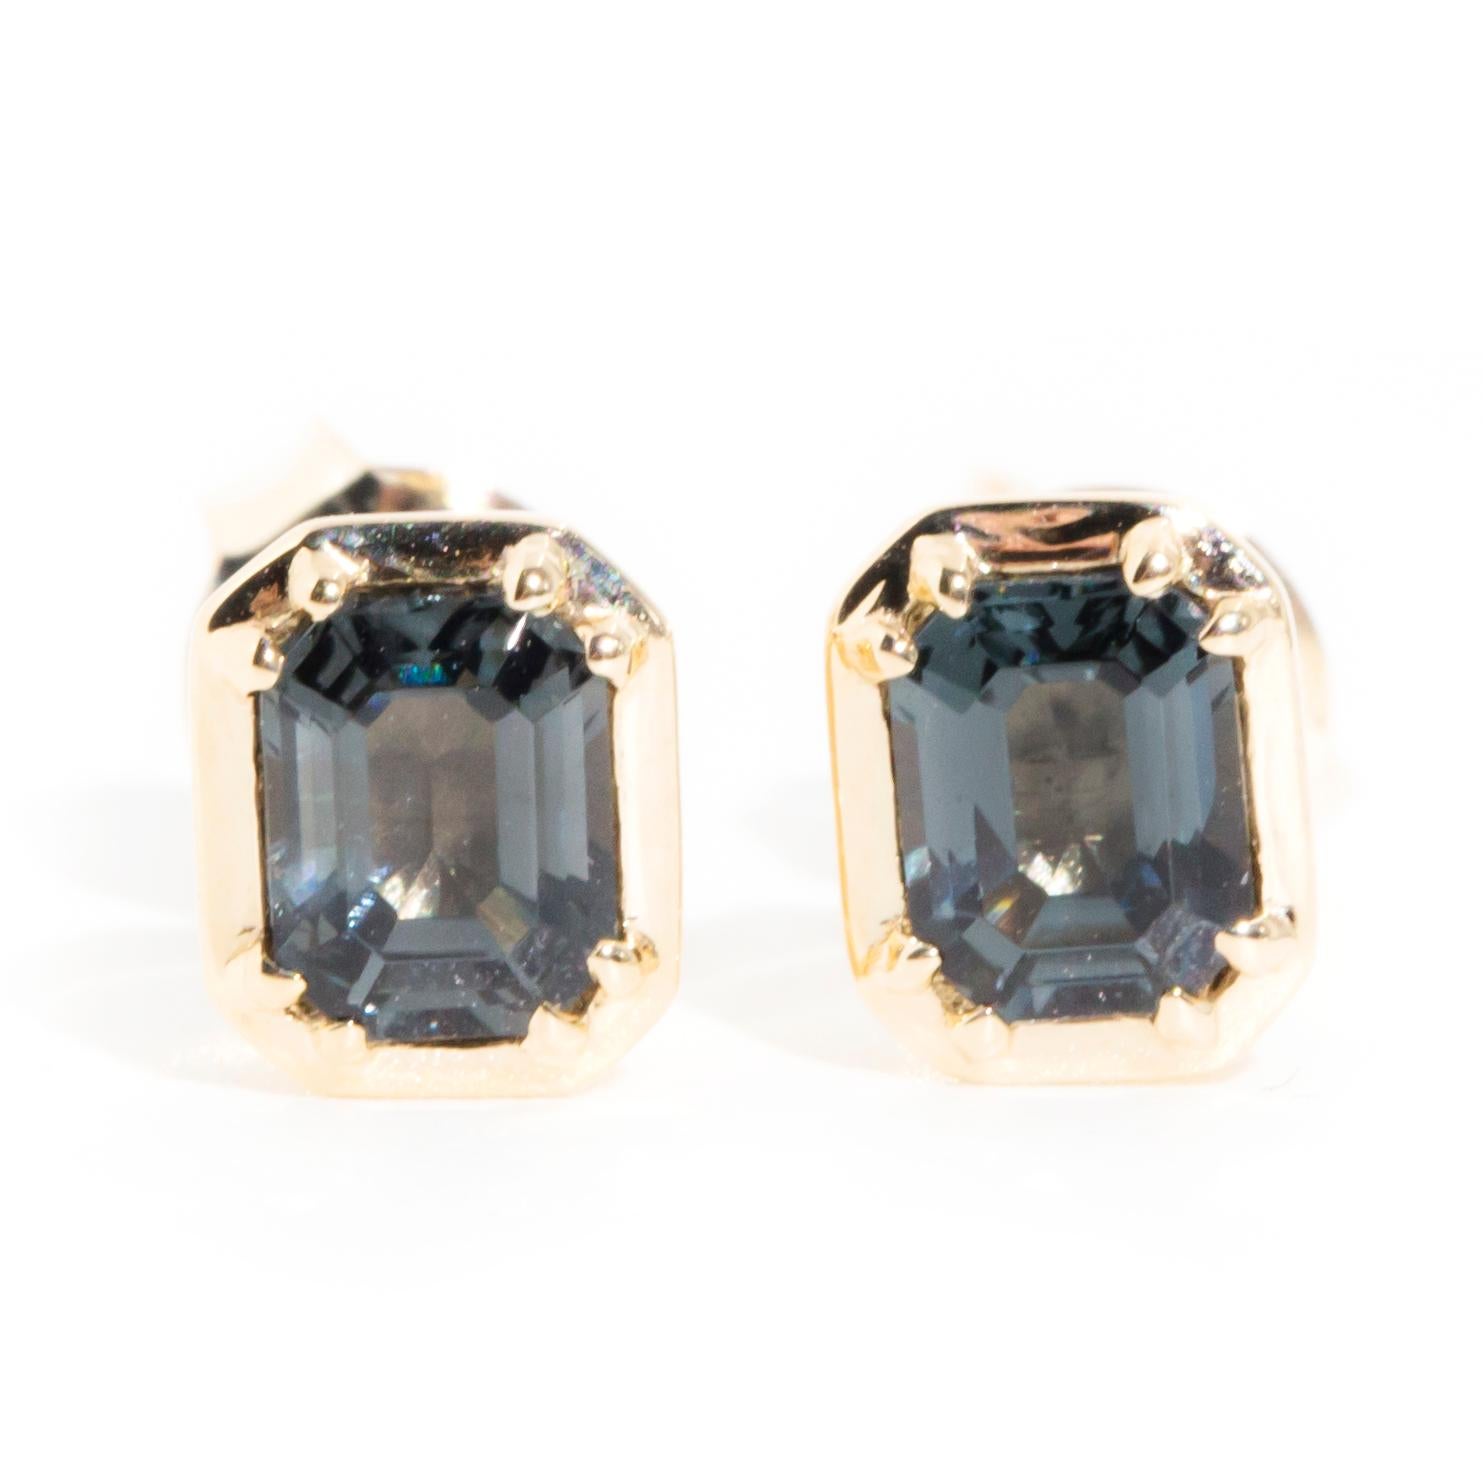 Crafted in 9 carat yellow gold, these alluring contemporary stud style earrings each feature a wonderous blue grey emerald cut spinel sitting in a gorgeous tapered bezel setting. We named these petite studs The Elsa Earrings. She fits comfortably to